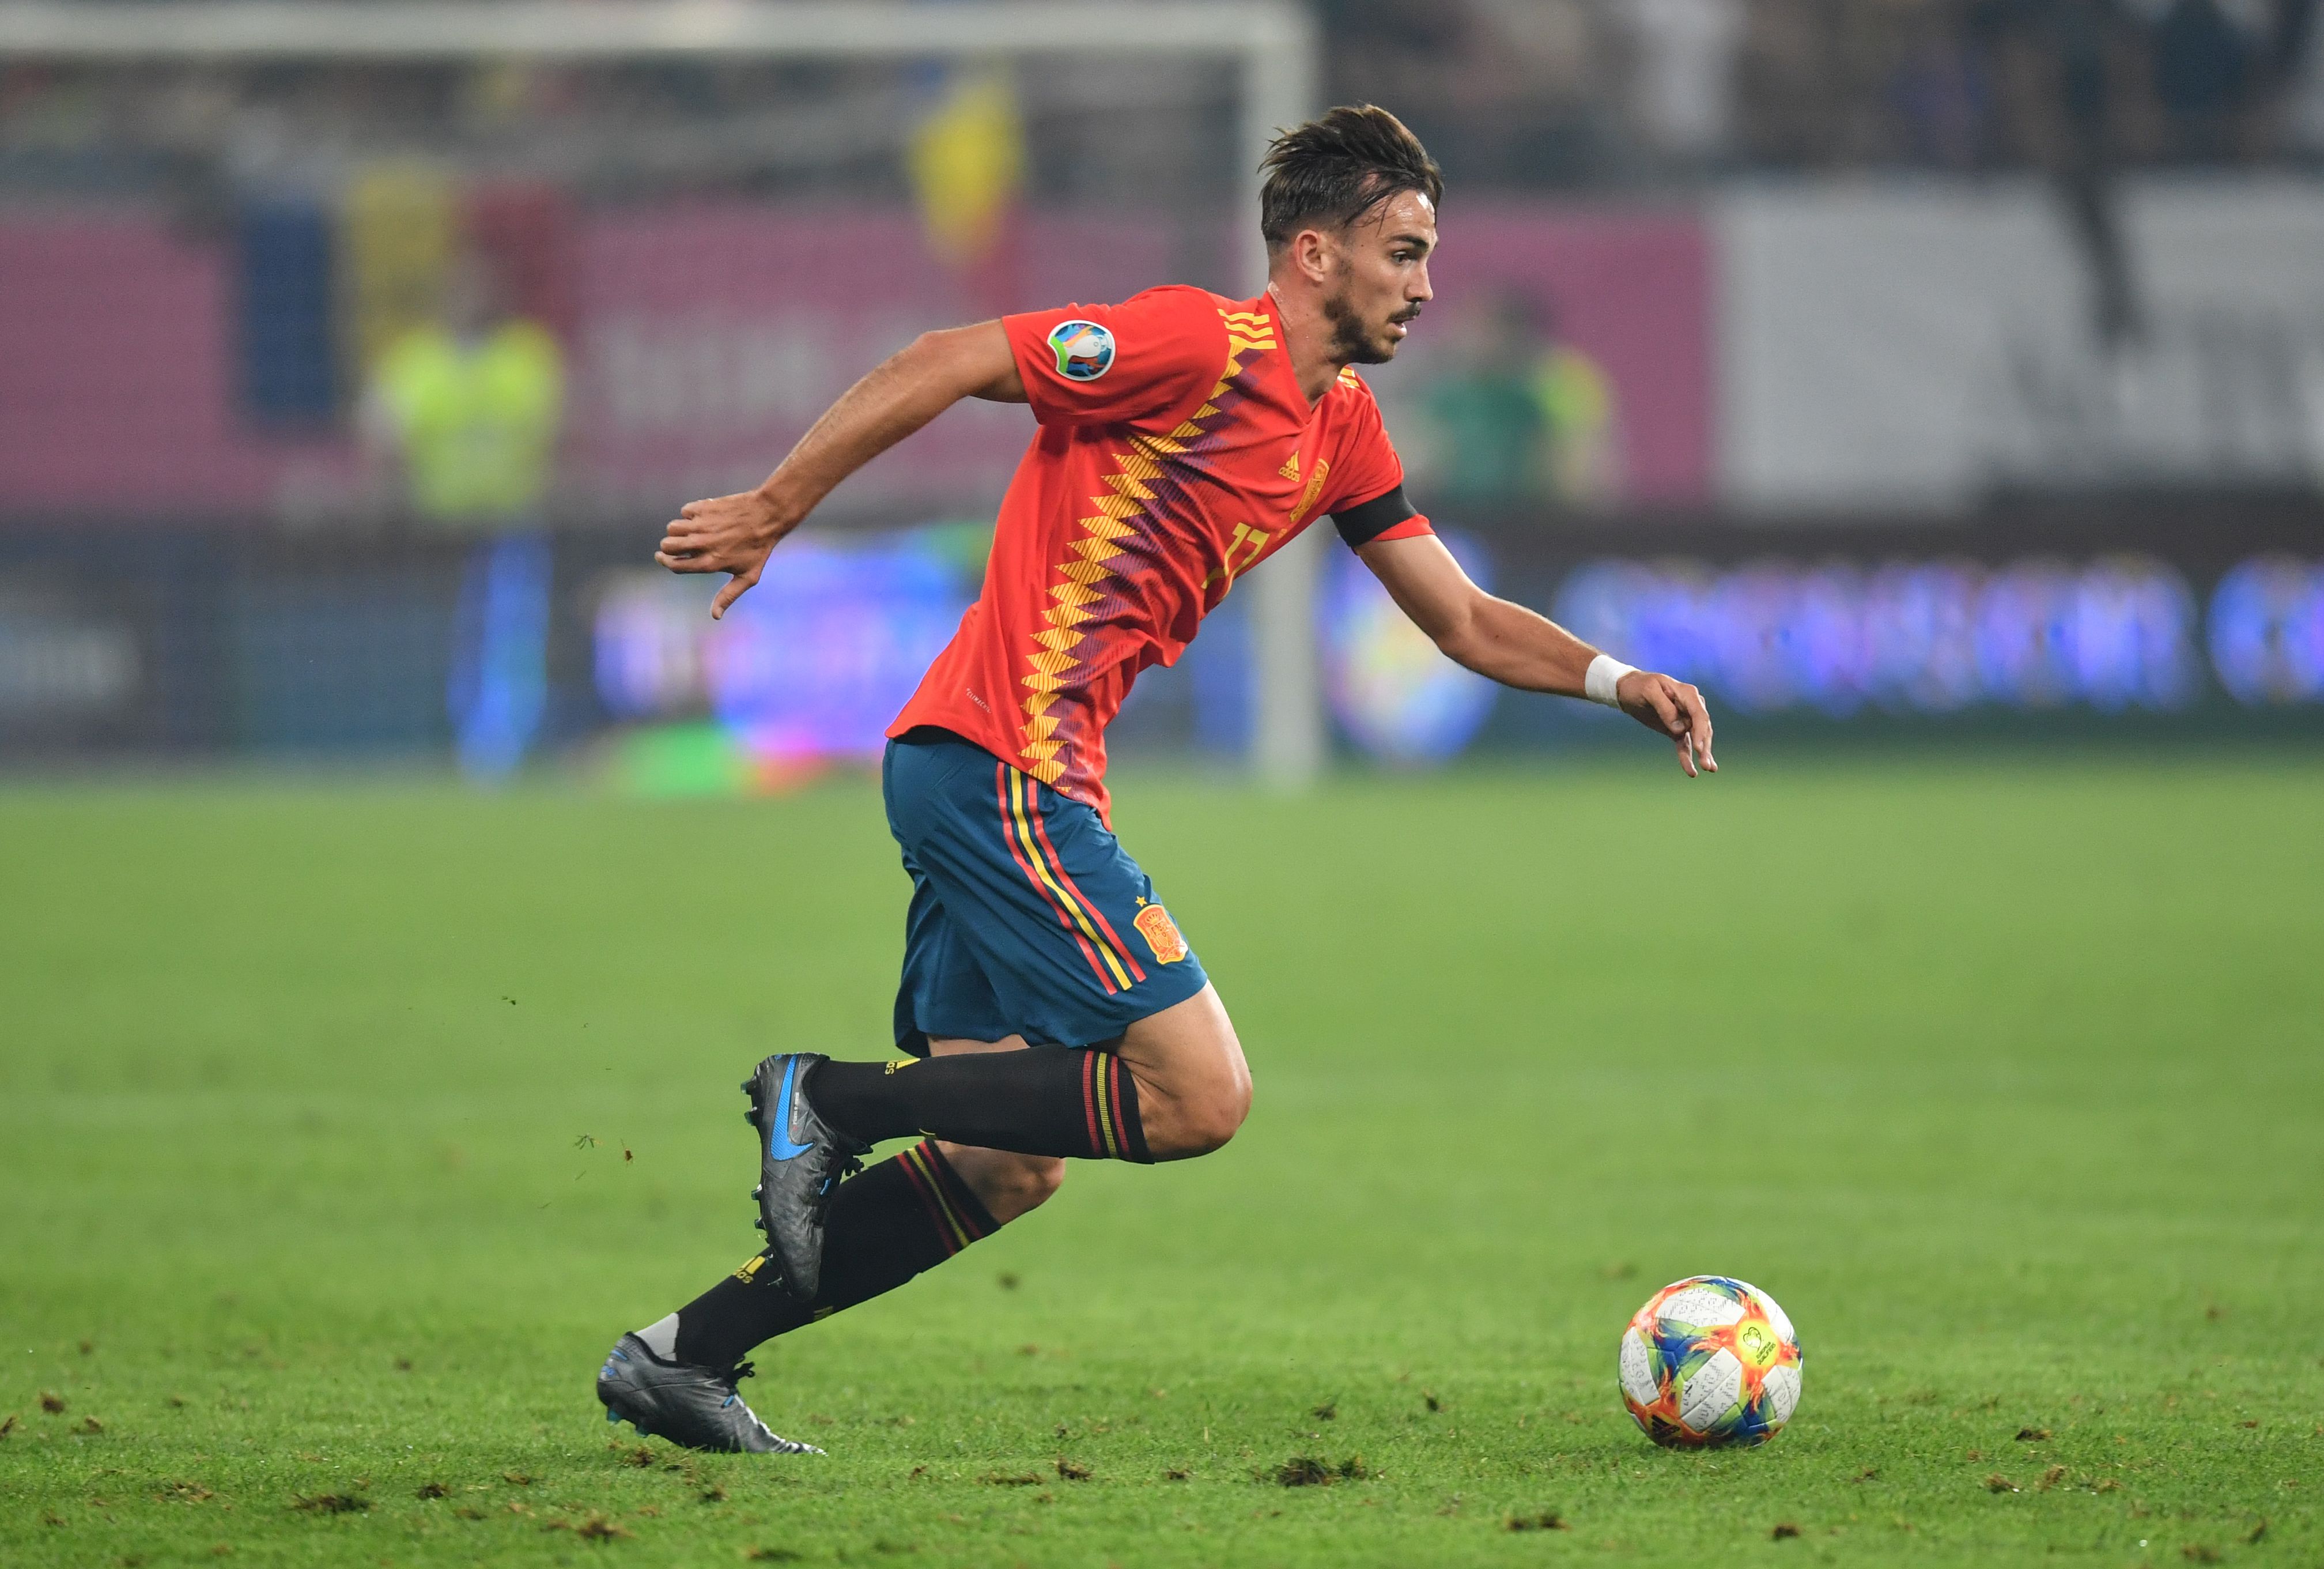 Fabian Ruiz of Spain is seen during the match against Romania of UEFA Euro 2020 Group F qualifier football match on National Arena stadium in Bucharest September 05, 2019. (Photo by Daniel MIHAILESCU / AFP)        (Photo credit should read DANIEL MIHAILESCU/AFP/Getty Images)